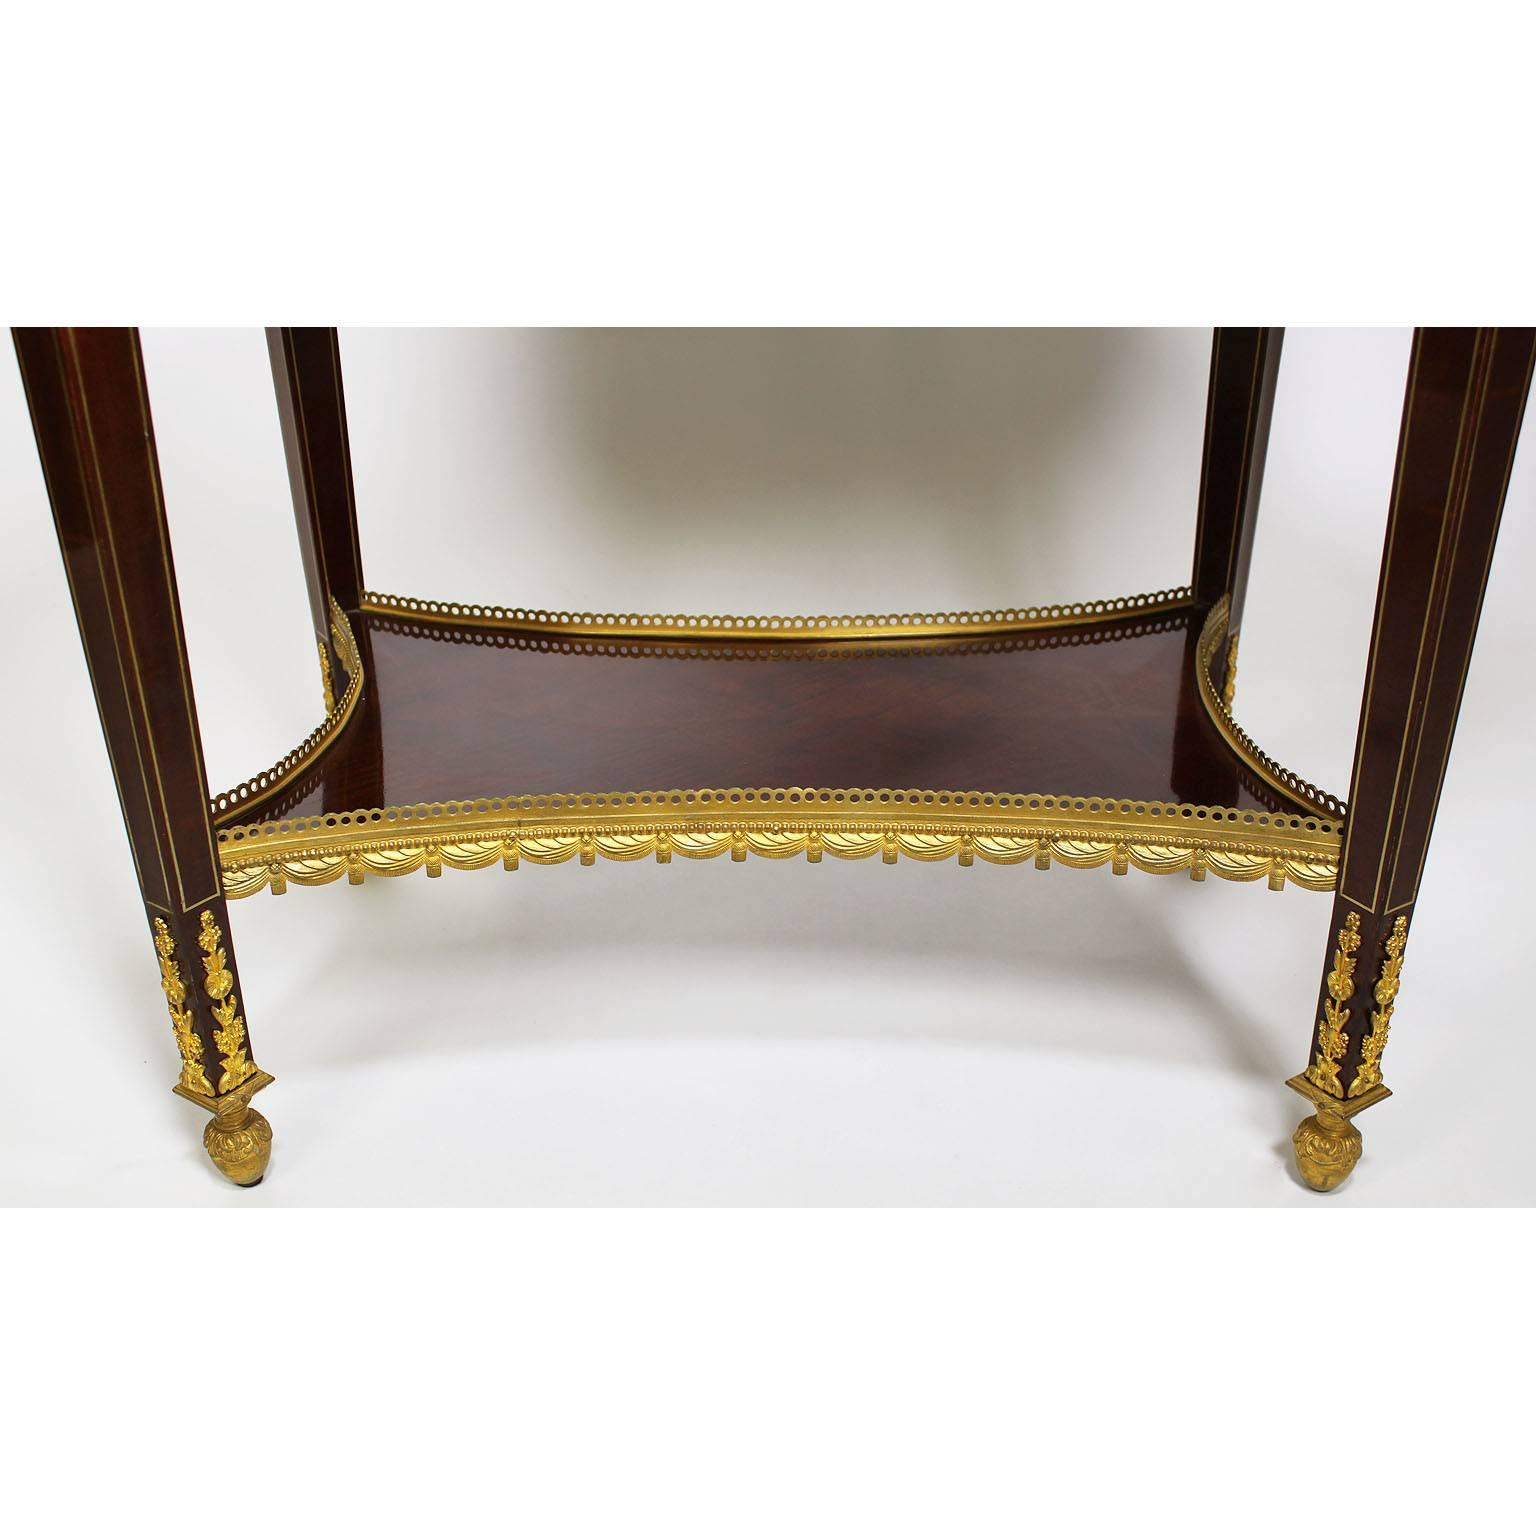 French 19th Century Louis XVI Style Ormolu-Mounted Mahogany Two-Tier Tea-Table For Sale 1